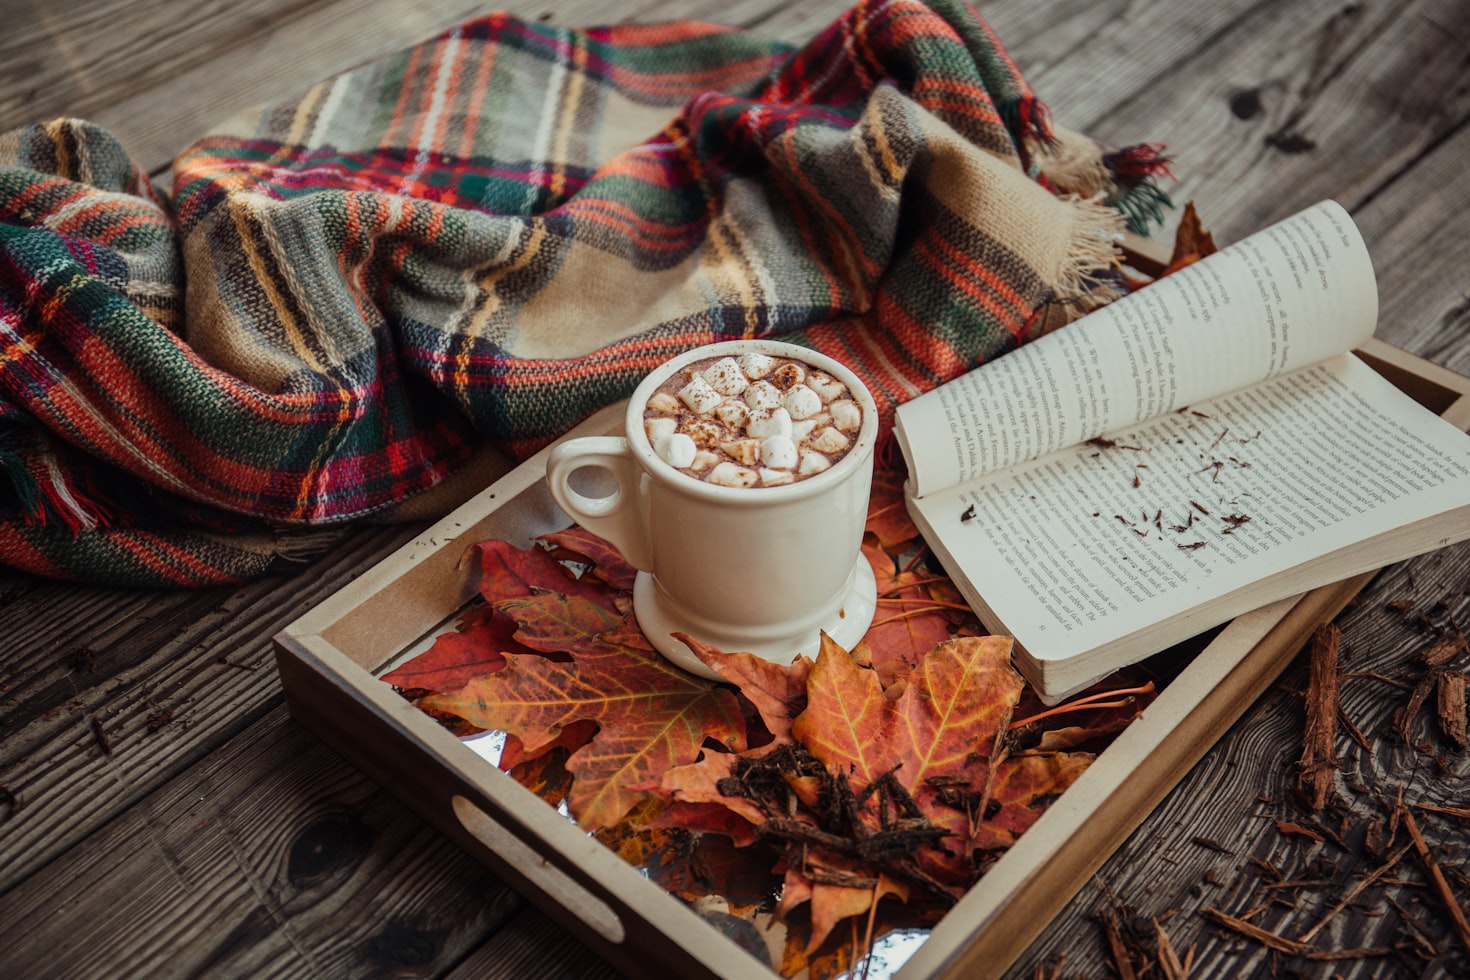 Cosy hot chocolate, warm blanket and a nice book